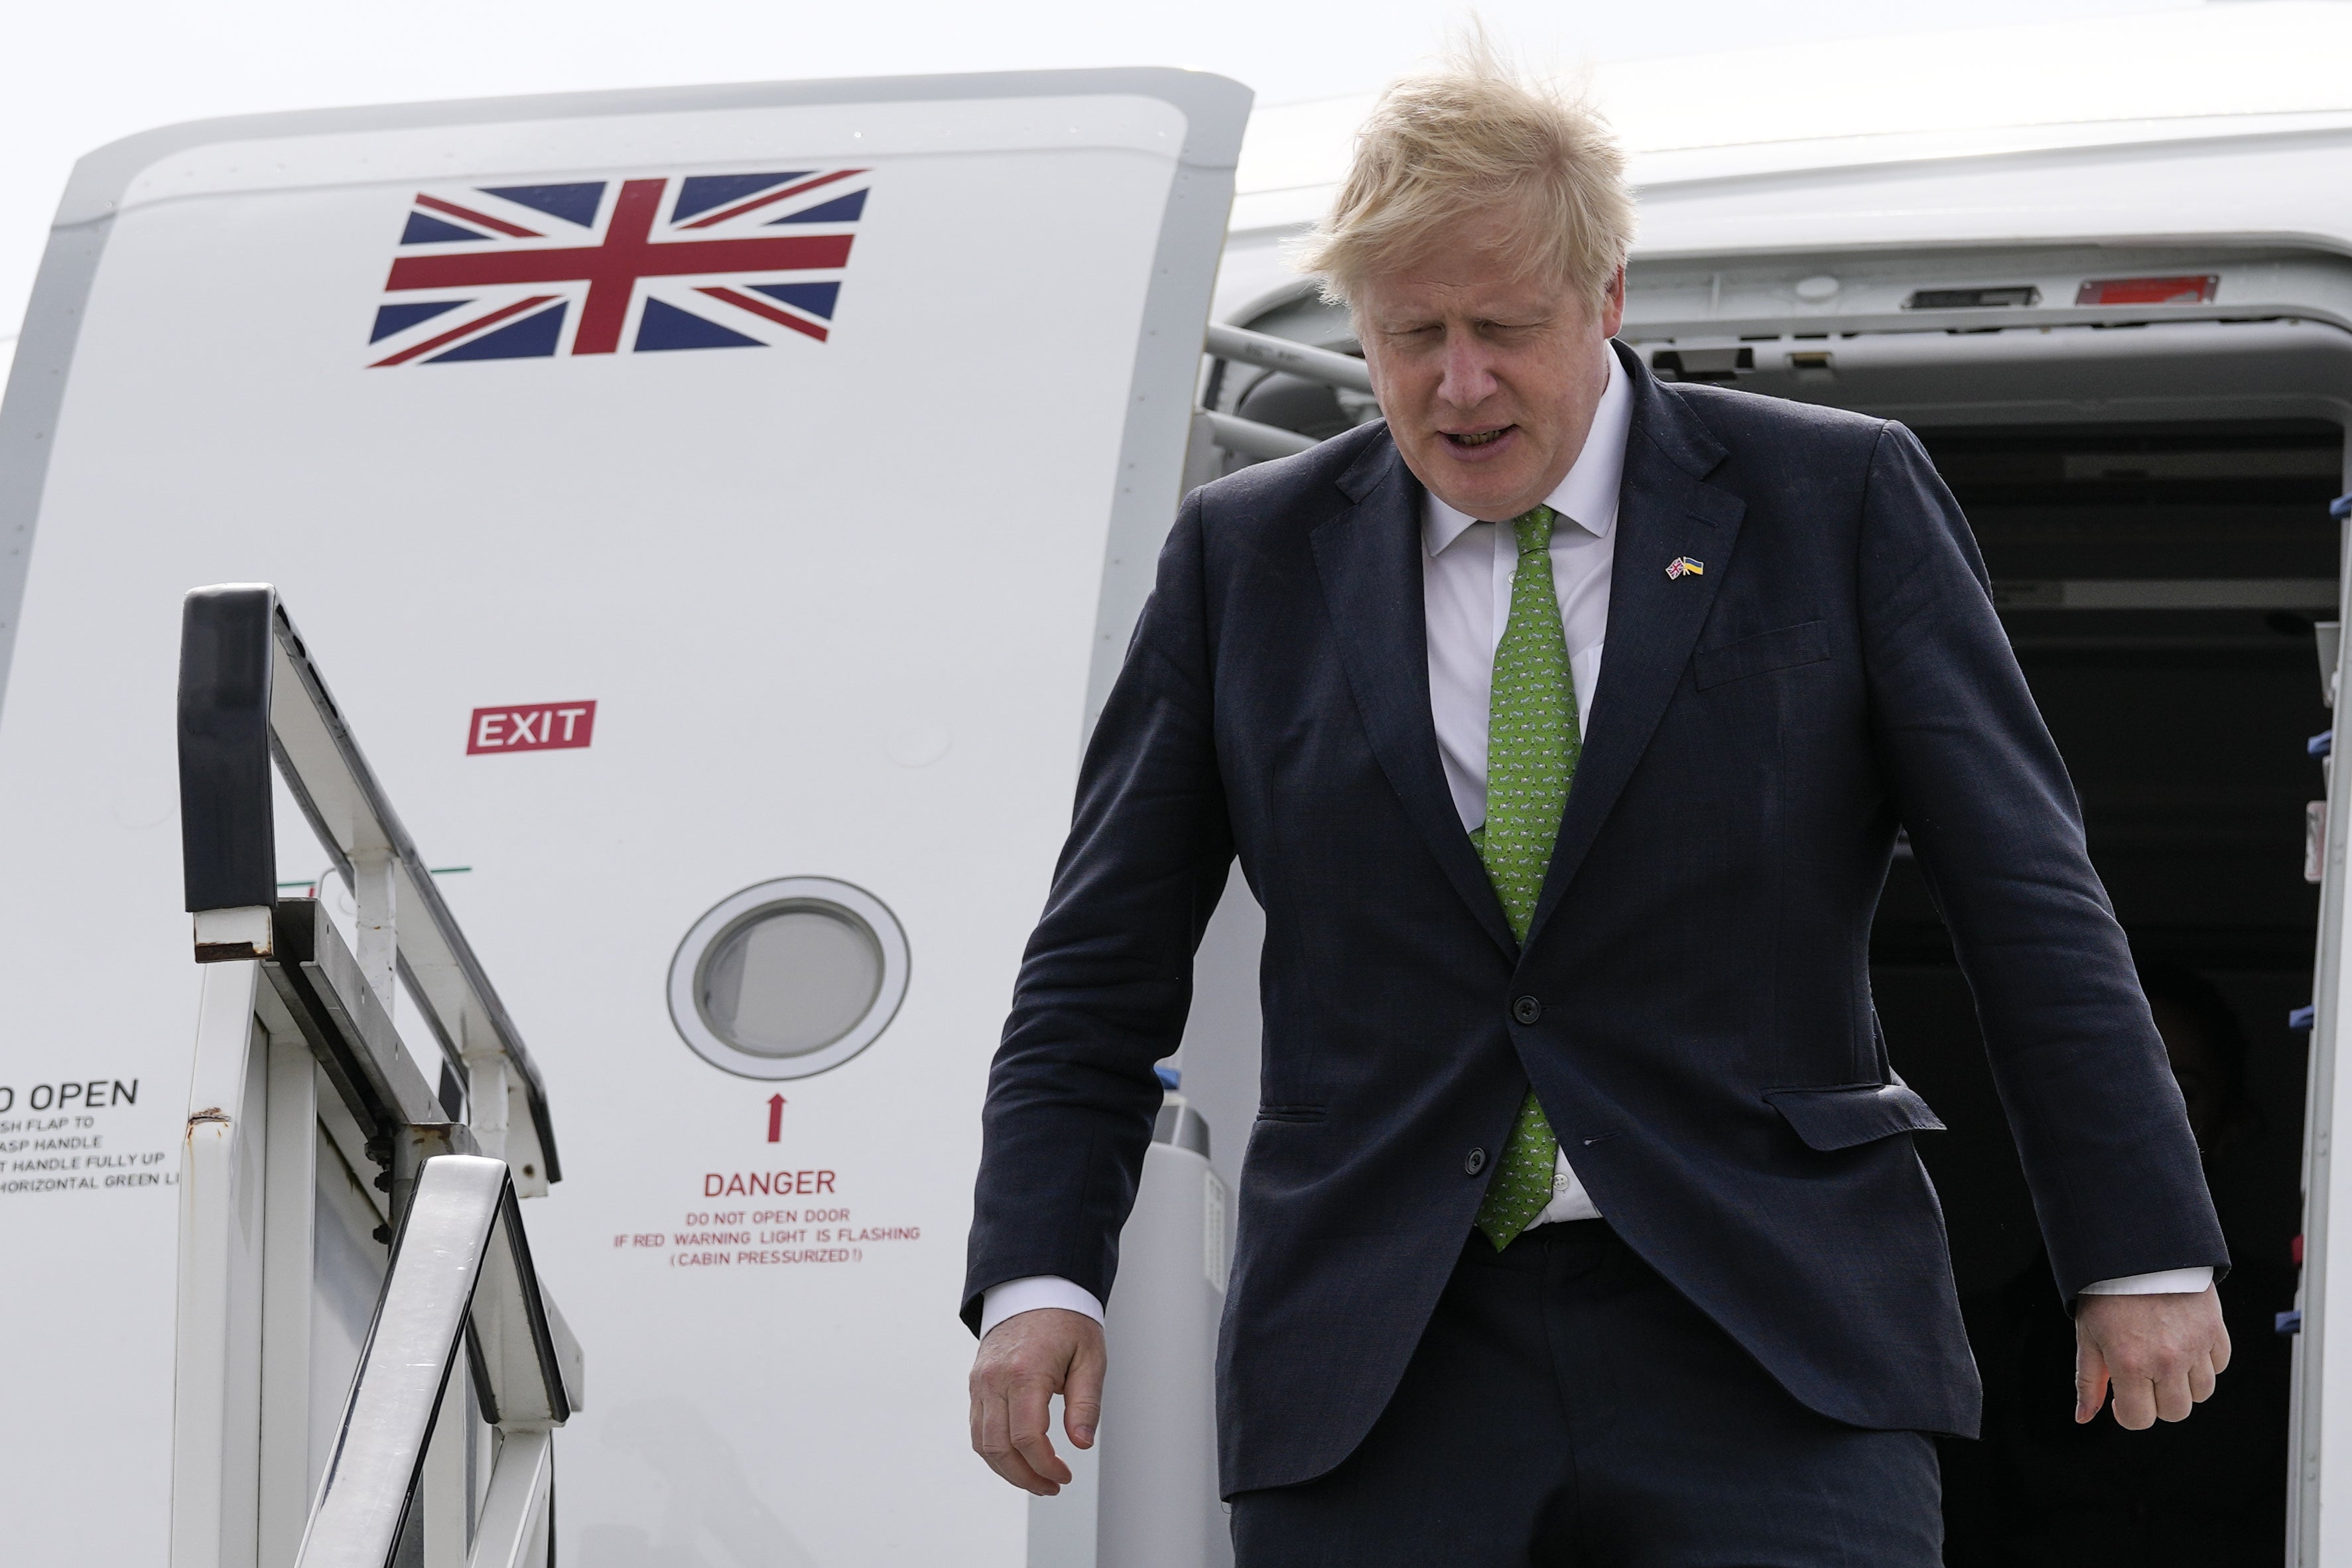 Boris Johnson has reiterated his threat to override elements of the Northern Ireland Protocol, warning the European Union that the Good Friday Agreement is more important than the post-Brexit deal (Frank Augstein/PA)